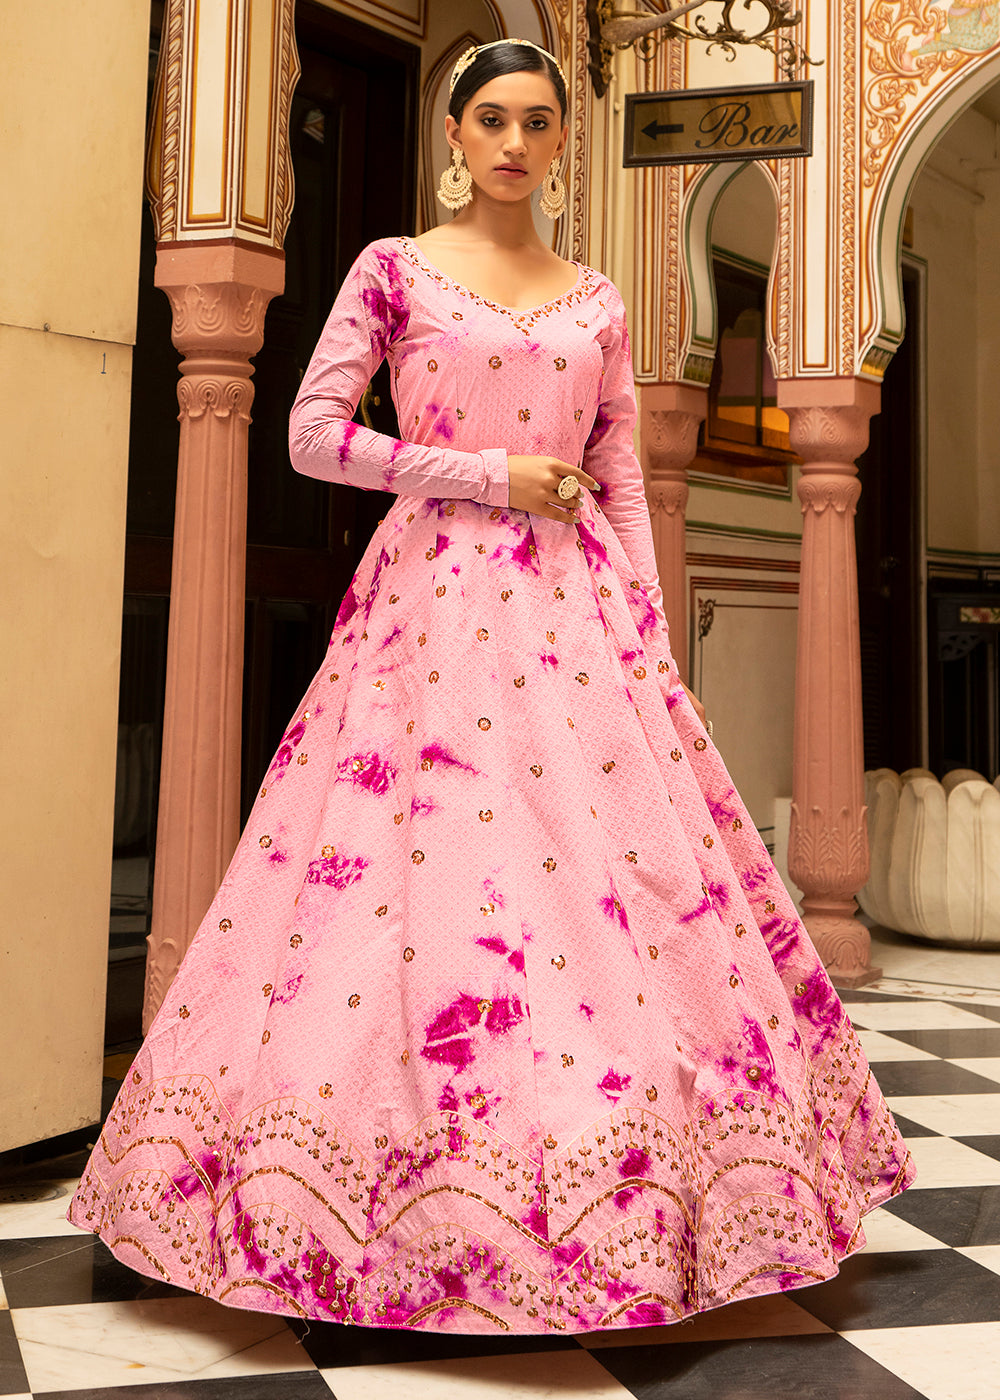 Buy Now Pink Shibori Print Embroidered Floor Length Cotton Gown Online in USA, UK, Australia, New Zealand, Canada & Worldwide at Empress Clothing. 